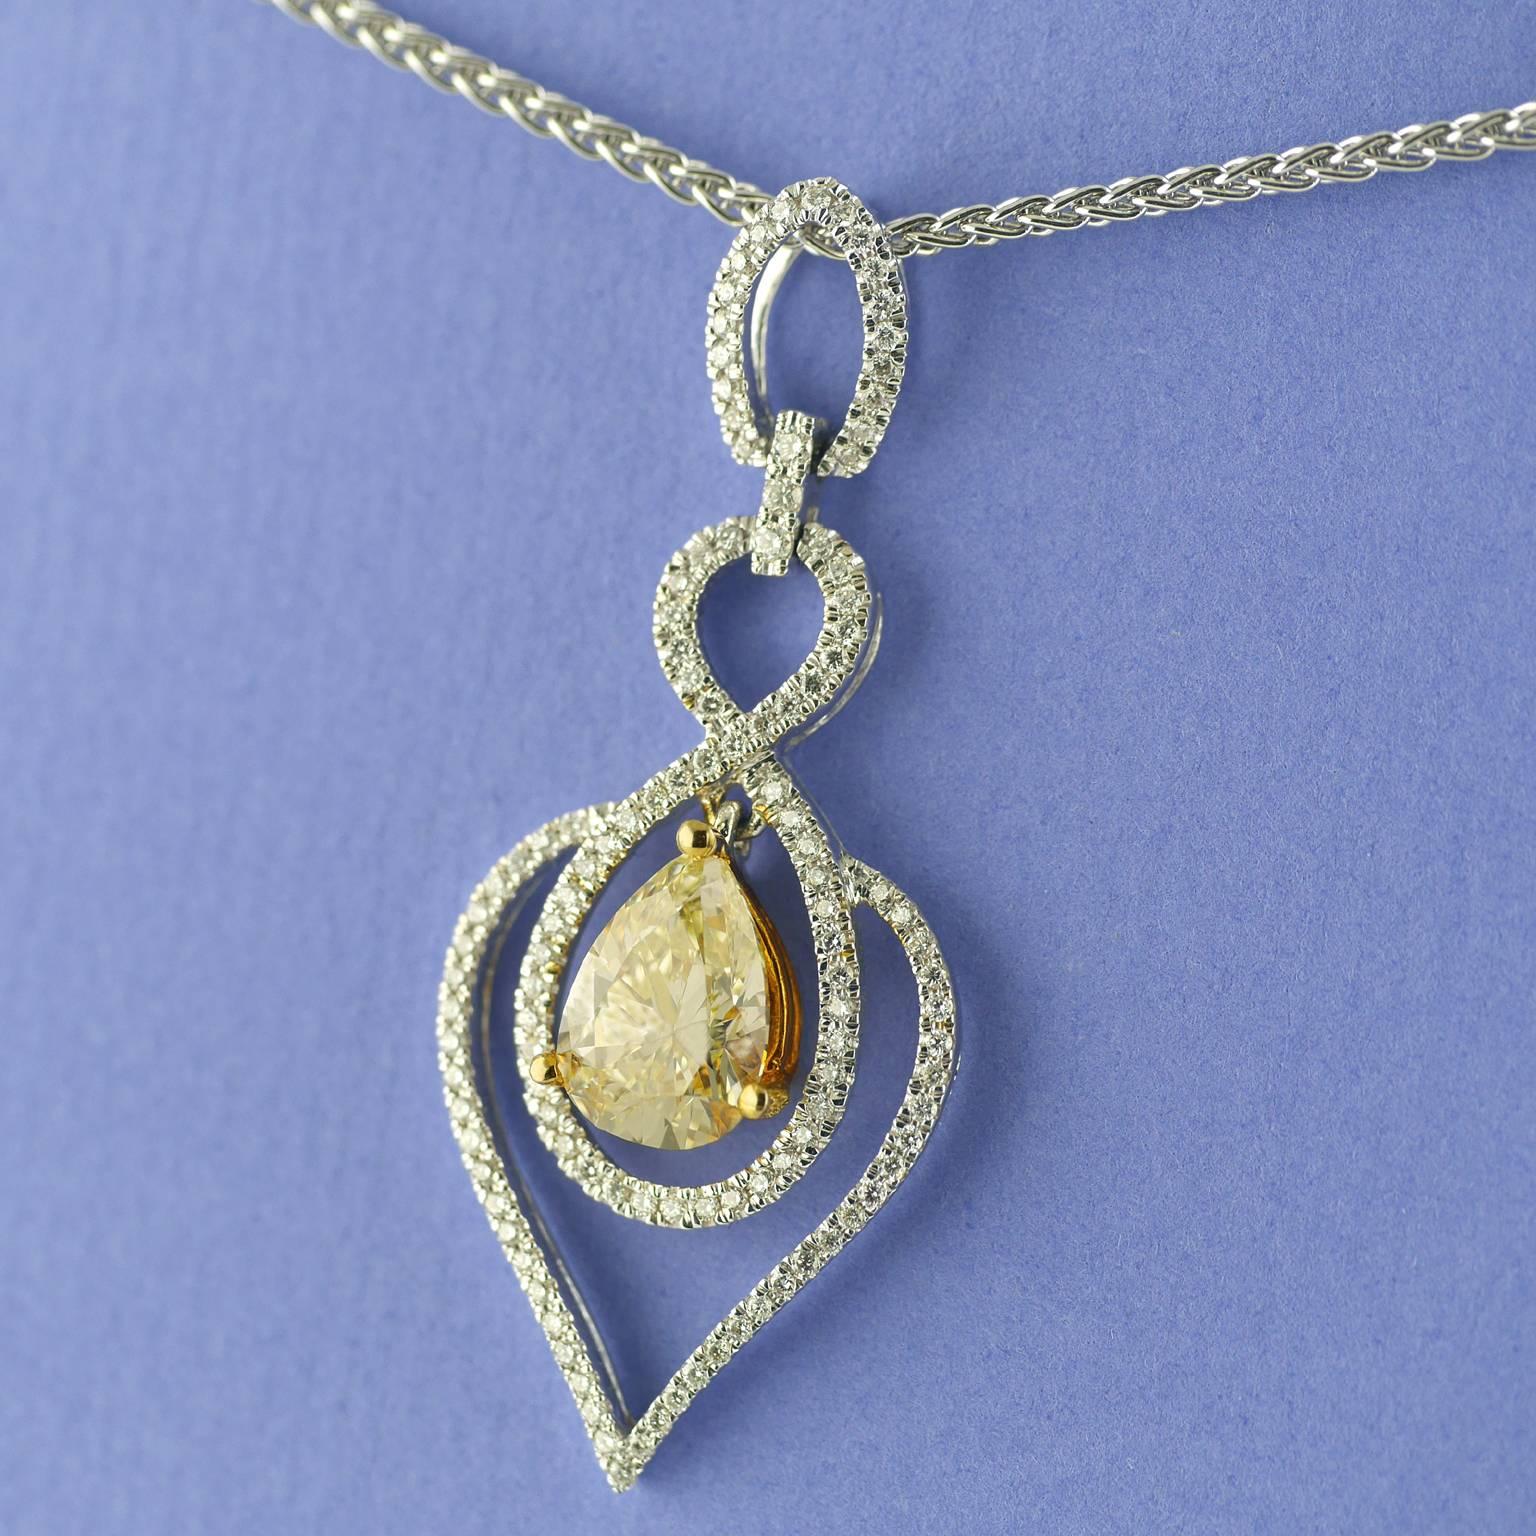 Light Fancy Yellow, natural, untreated, Diamond Pendant circa 1970 on an 18 carat white gold chain.

Articulated, tremblant, central pear shape light fancy yellow diamond drop, 2.03 carats, VVS2 (Certificated) mounted in 18ct yellow gold. Surrounded